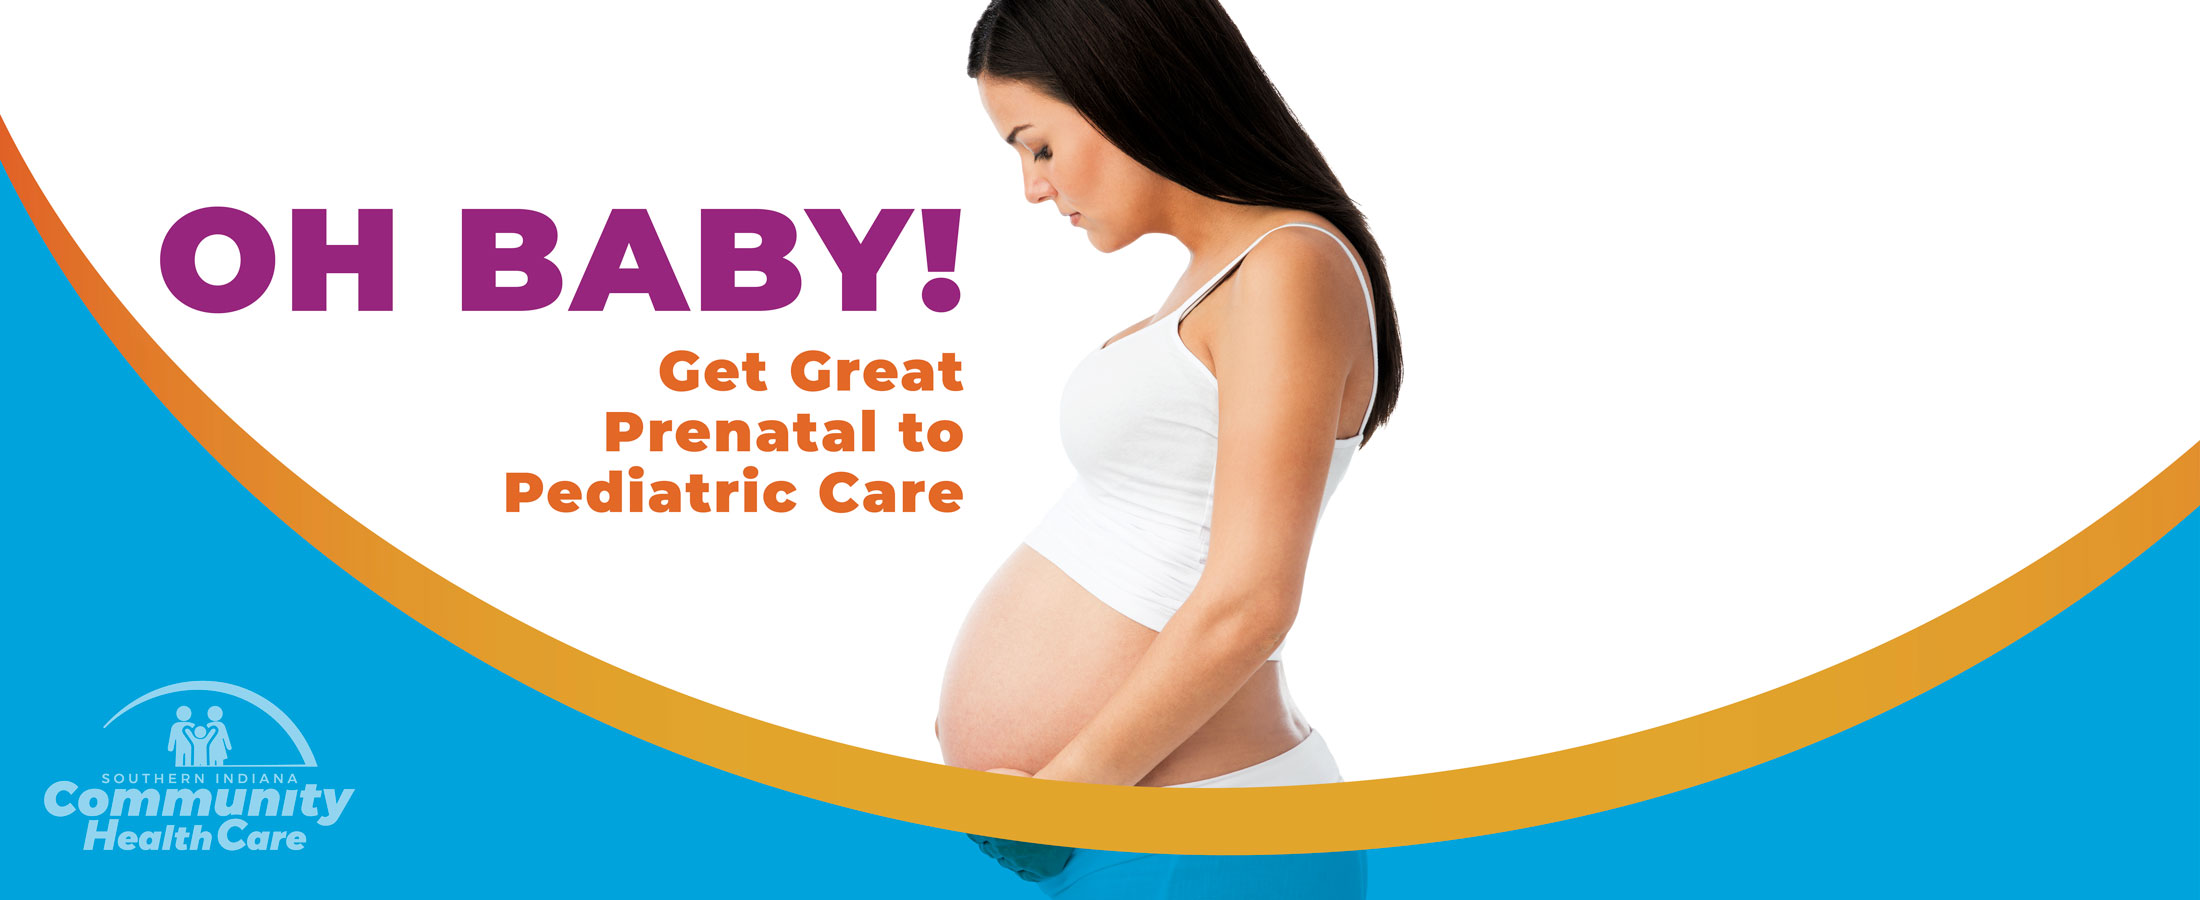 OH Baby! Get Great Prenatal to Pediatric Care